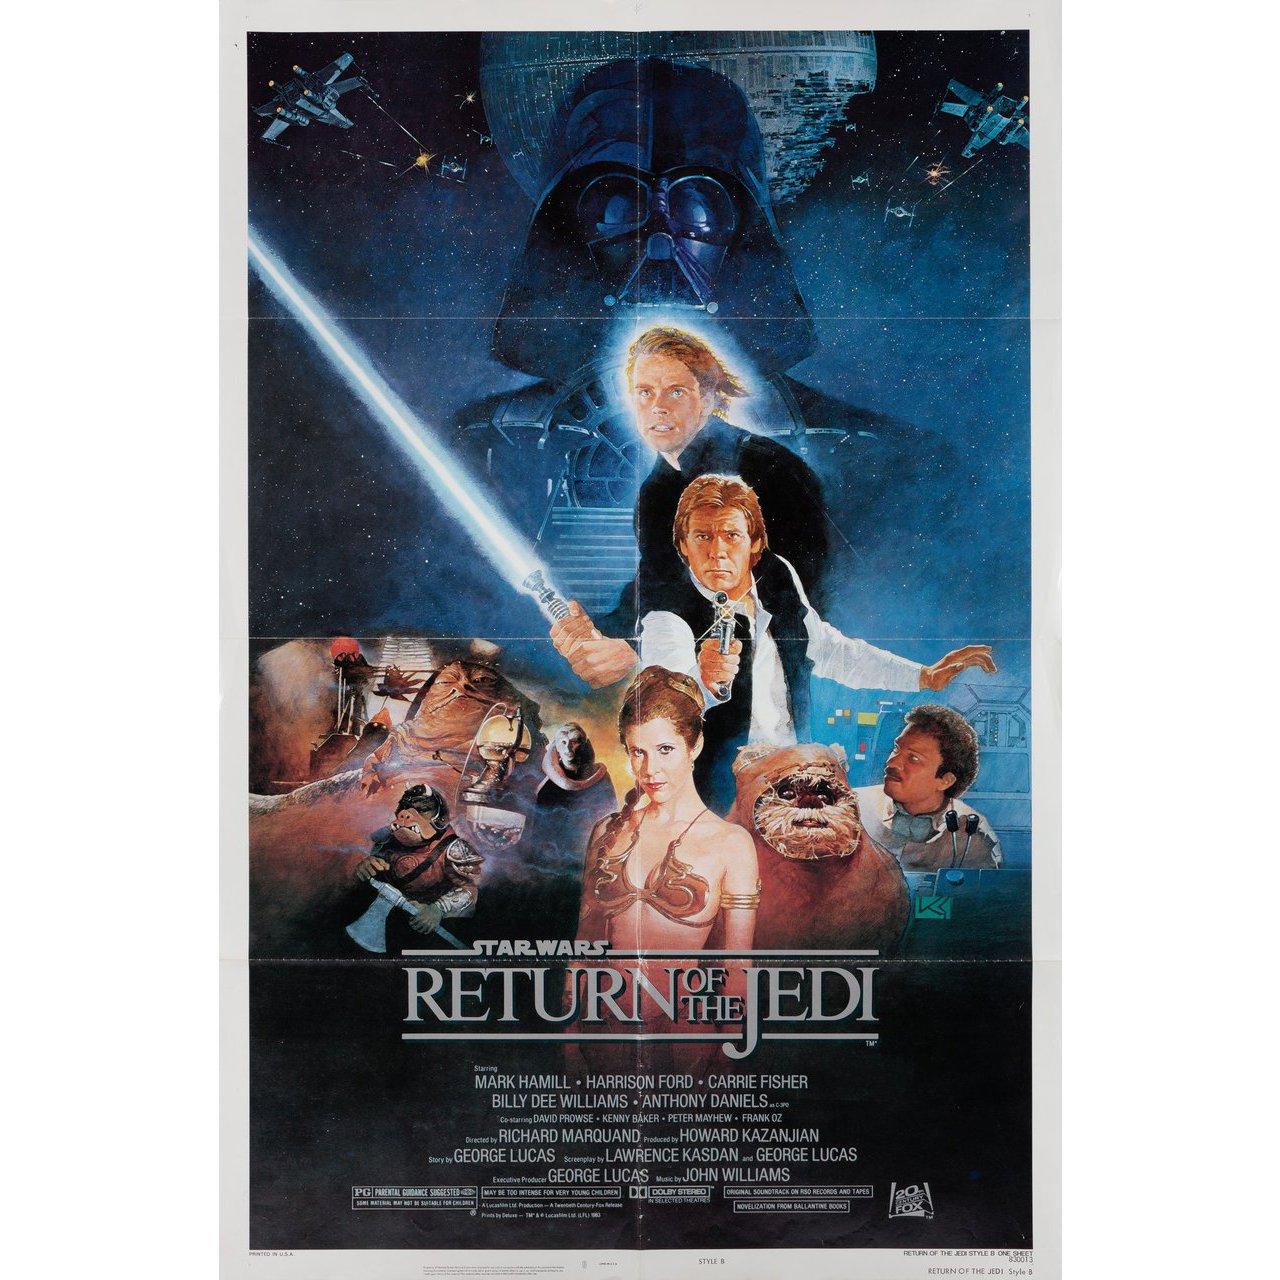 Original 1983 U.S. one sheet poster for the film Return of the Jedi (Star Wars: Episode VI) directed by Richard Marquand with Mark Hamill / Harrison Ford / Carrie Fisher / Billy Dee Williams. Very Good condition, folded with pinholes. Many original